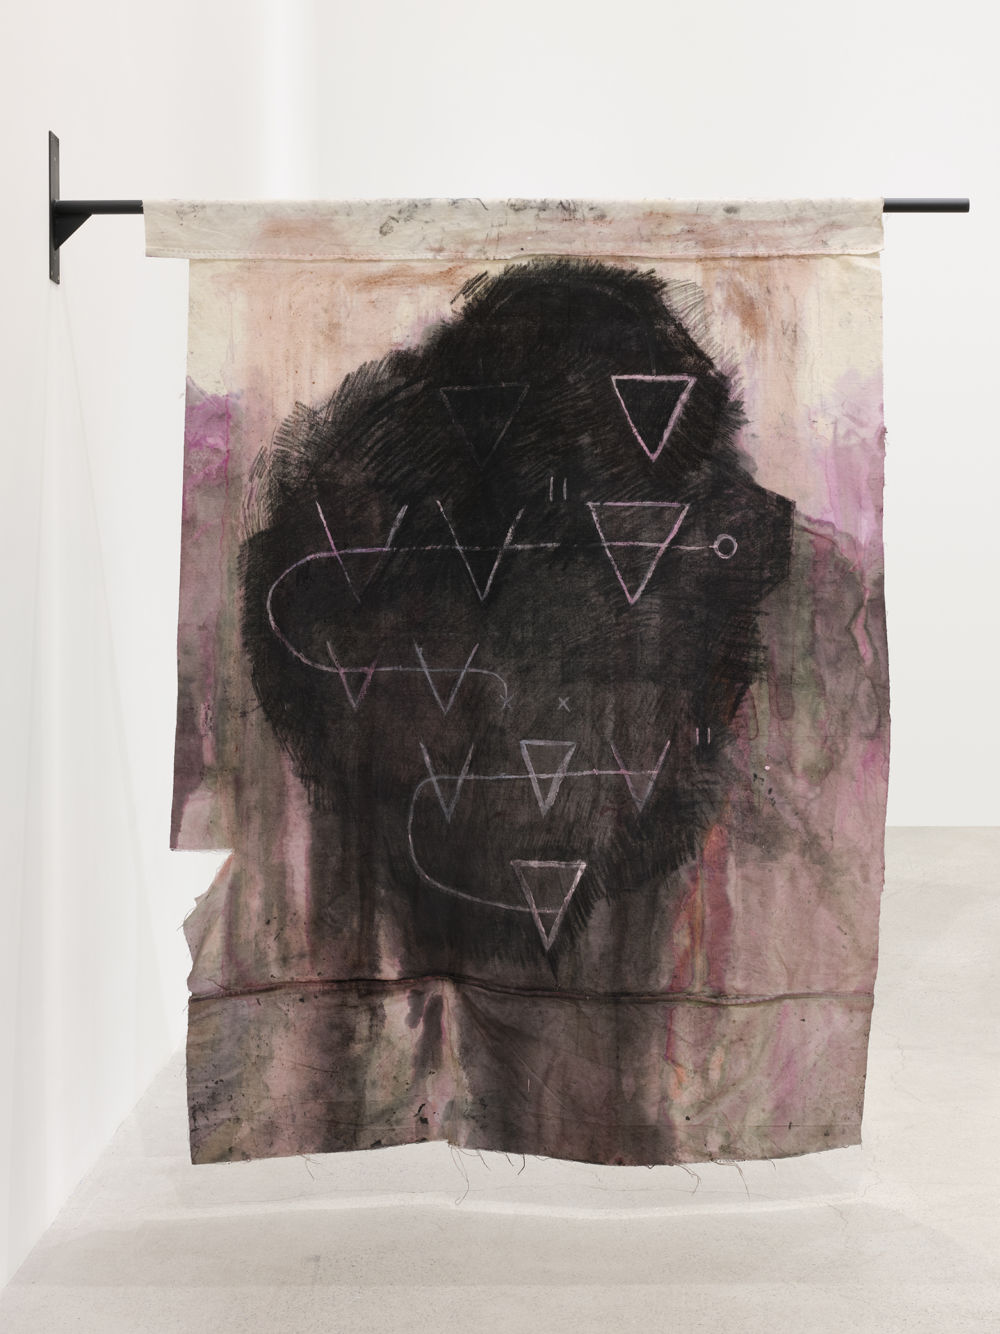 Duane Linklater, score for the back of my head, 2021, canvas, sumac, cochineal dye, charcoal, house paint, cotton thread, steel, 76 x 58 x 5 in. (193 x 147 x 13 cm) by 